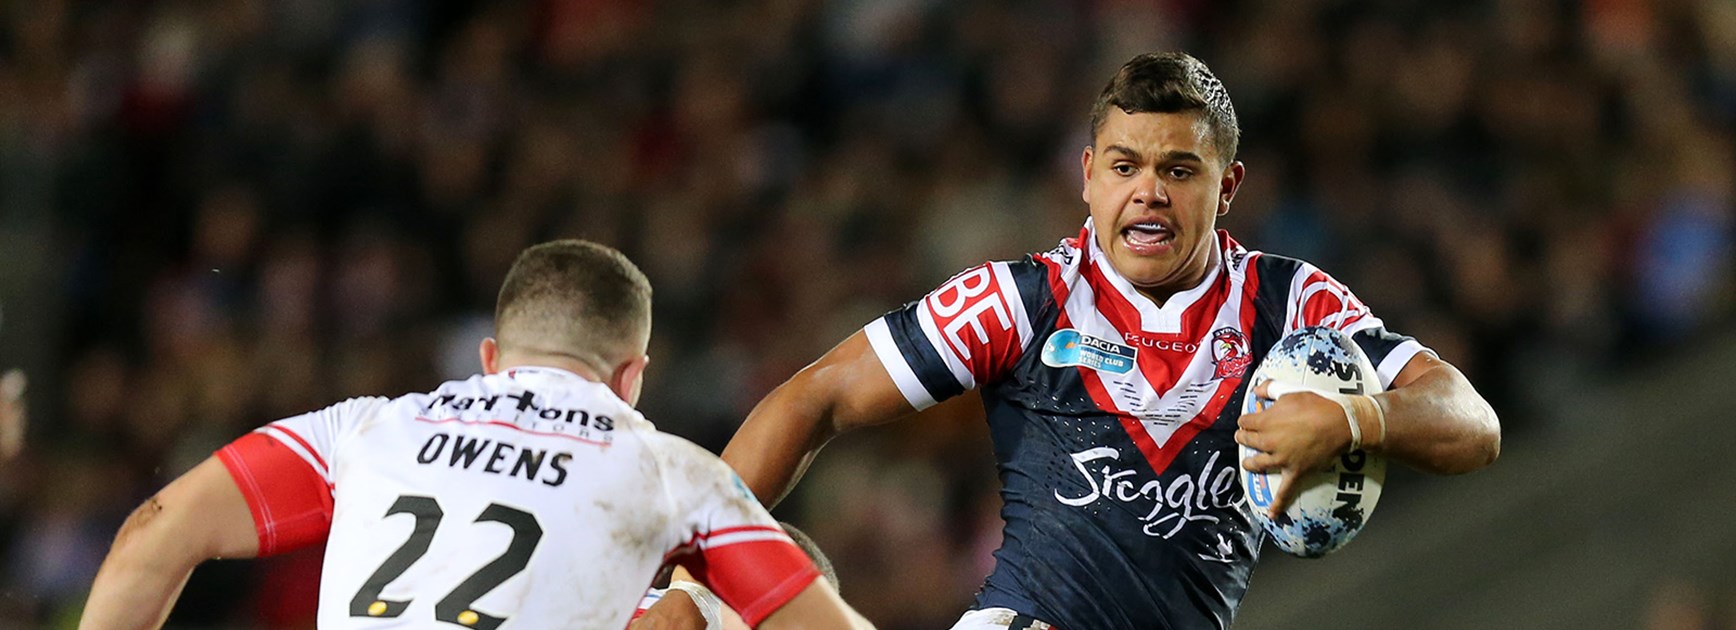 Young Sydney Roosters back Latrell Mitchell was impressive in his side's win over St Helens.